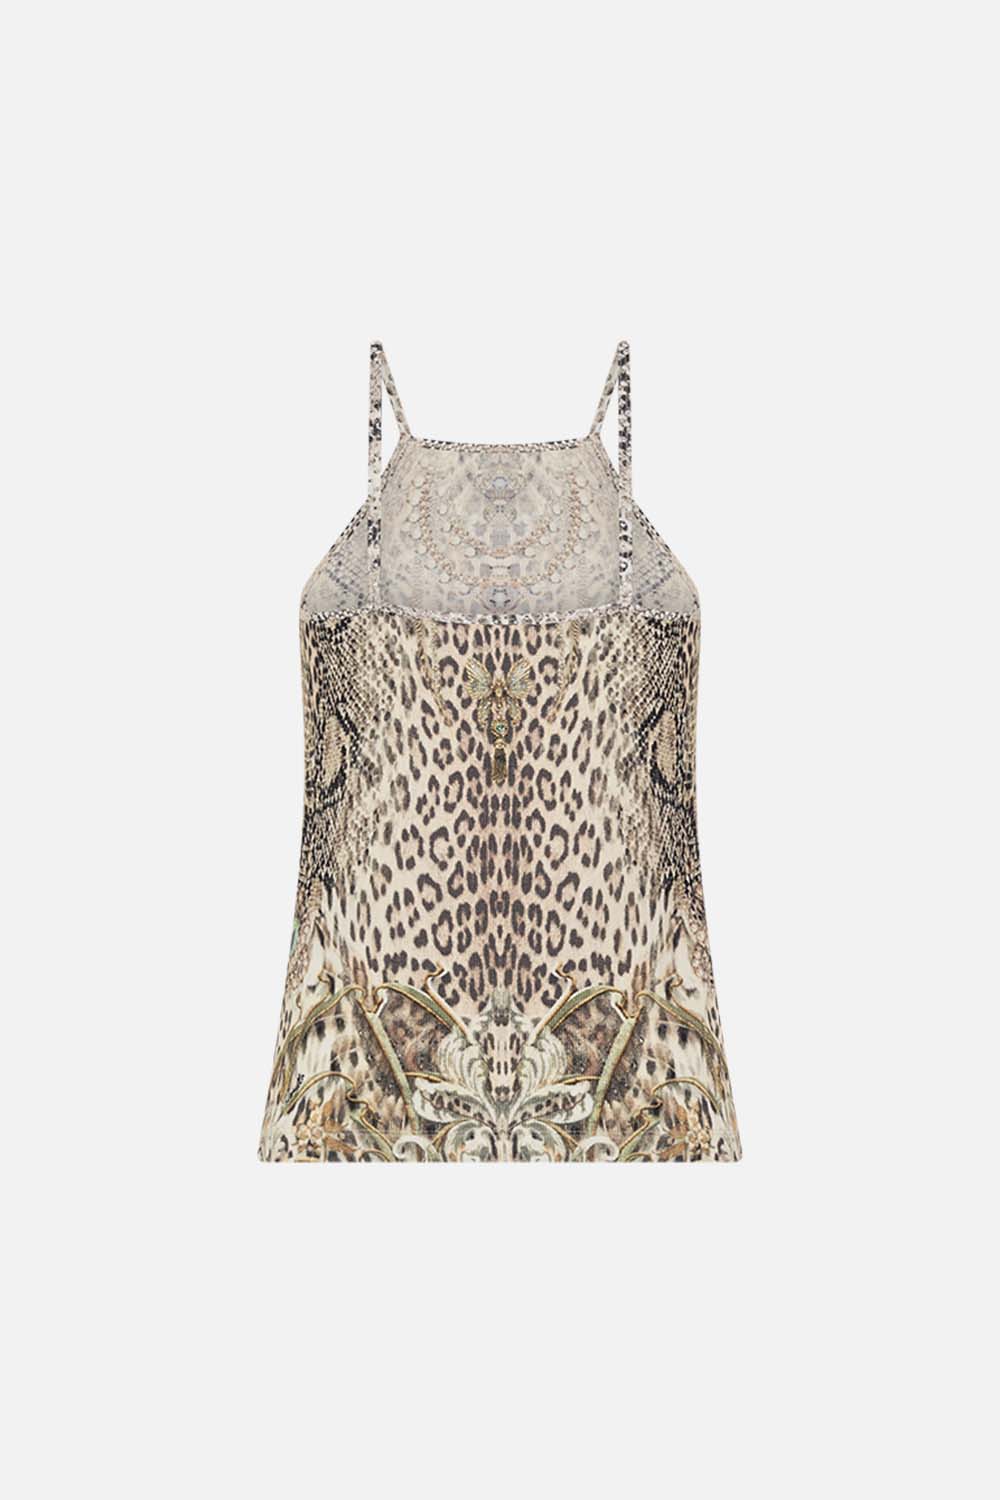 CAMILLA jersey tank top in Looking Glass Housese print 